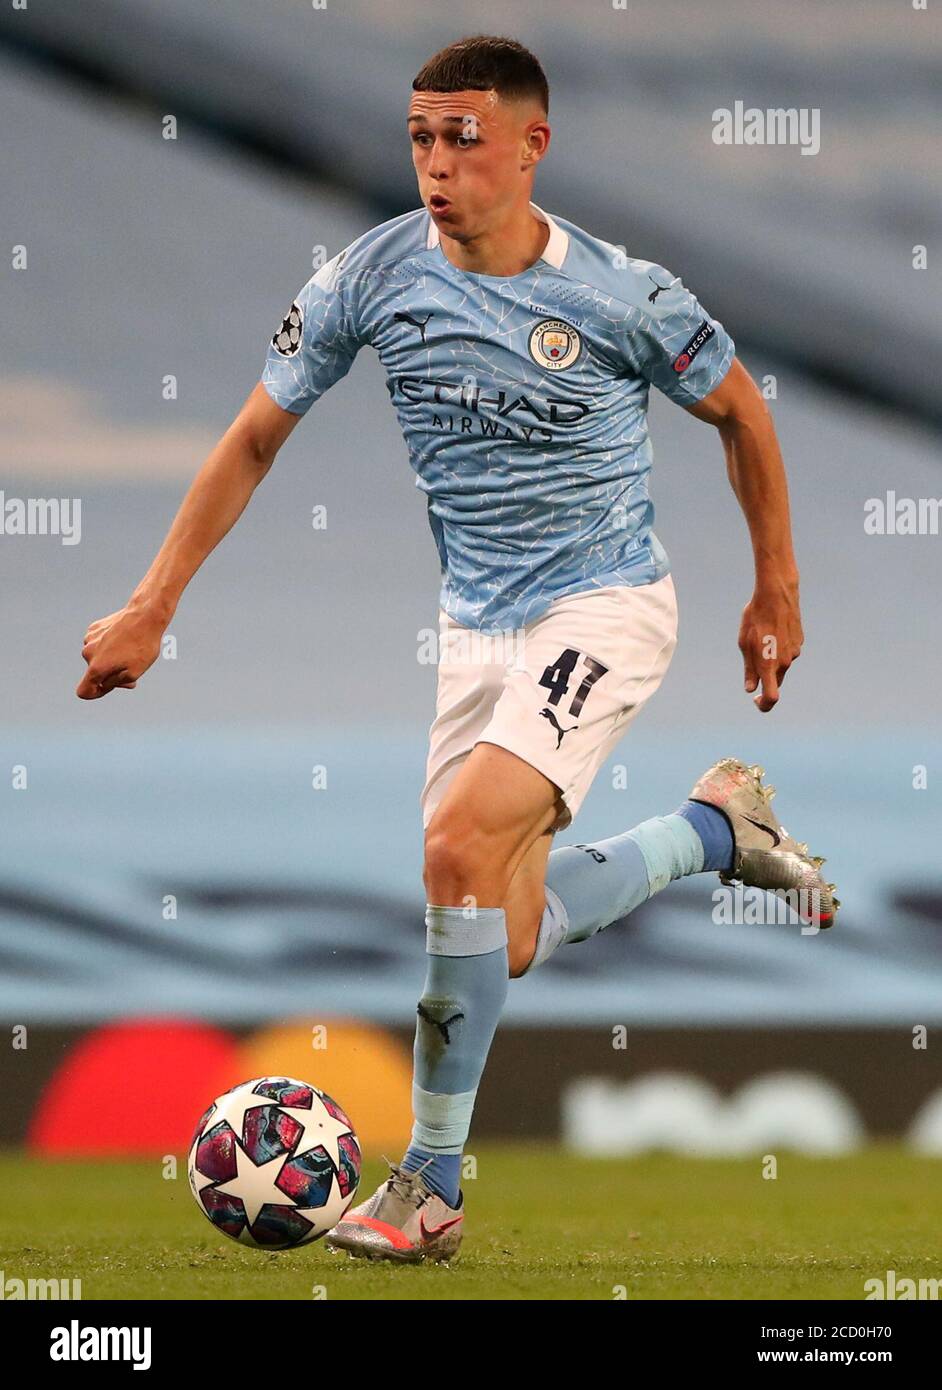 Manchester City's Phil Foden during the UEFA Champions League, round of 16, second leg match at the Etihad Stadium, Manchester. Friday August 7, 2020. See PA story SOCCER Man City. Photo credit should read: Nick Potts/PA Wire. Stock Photo